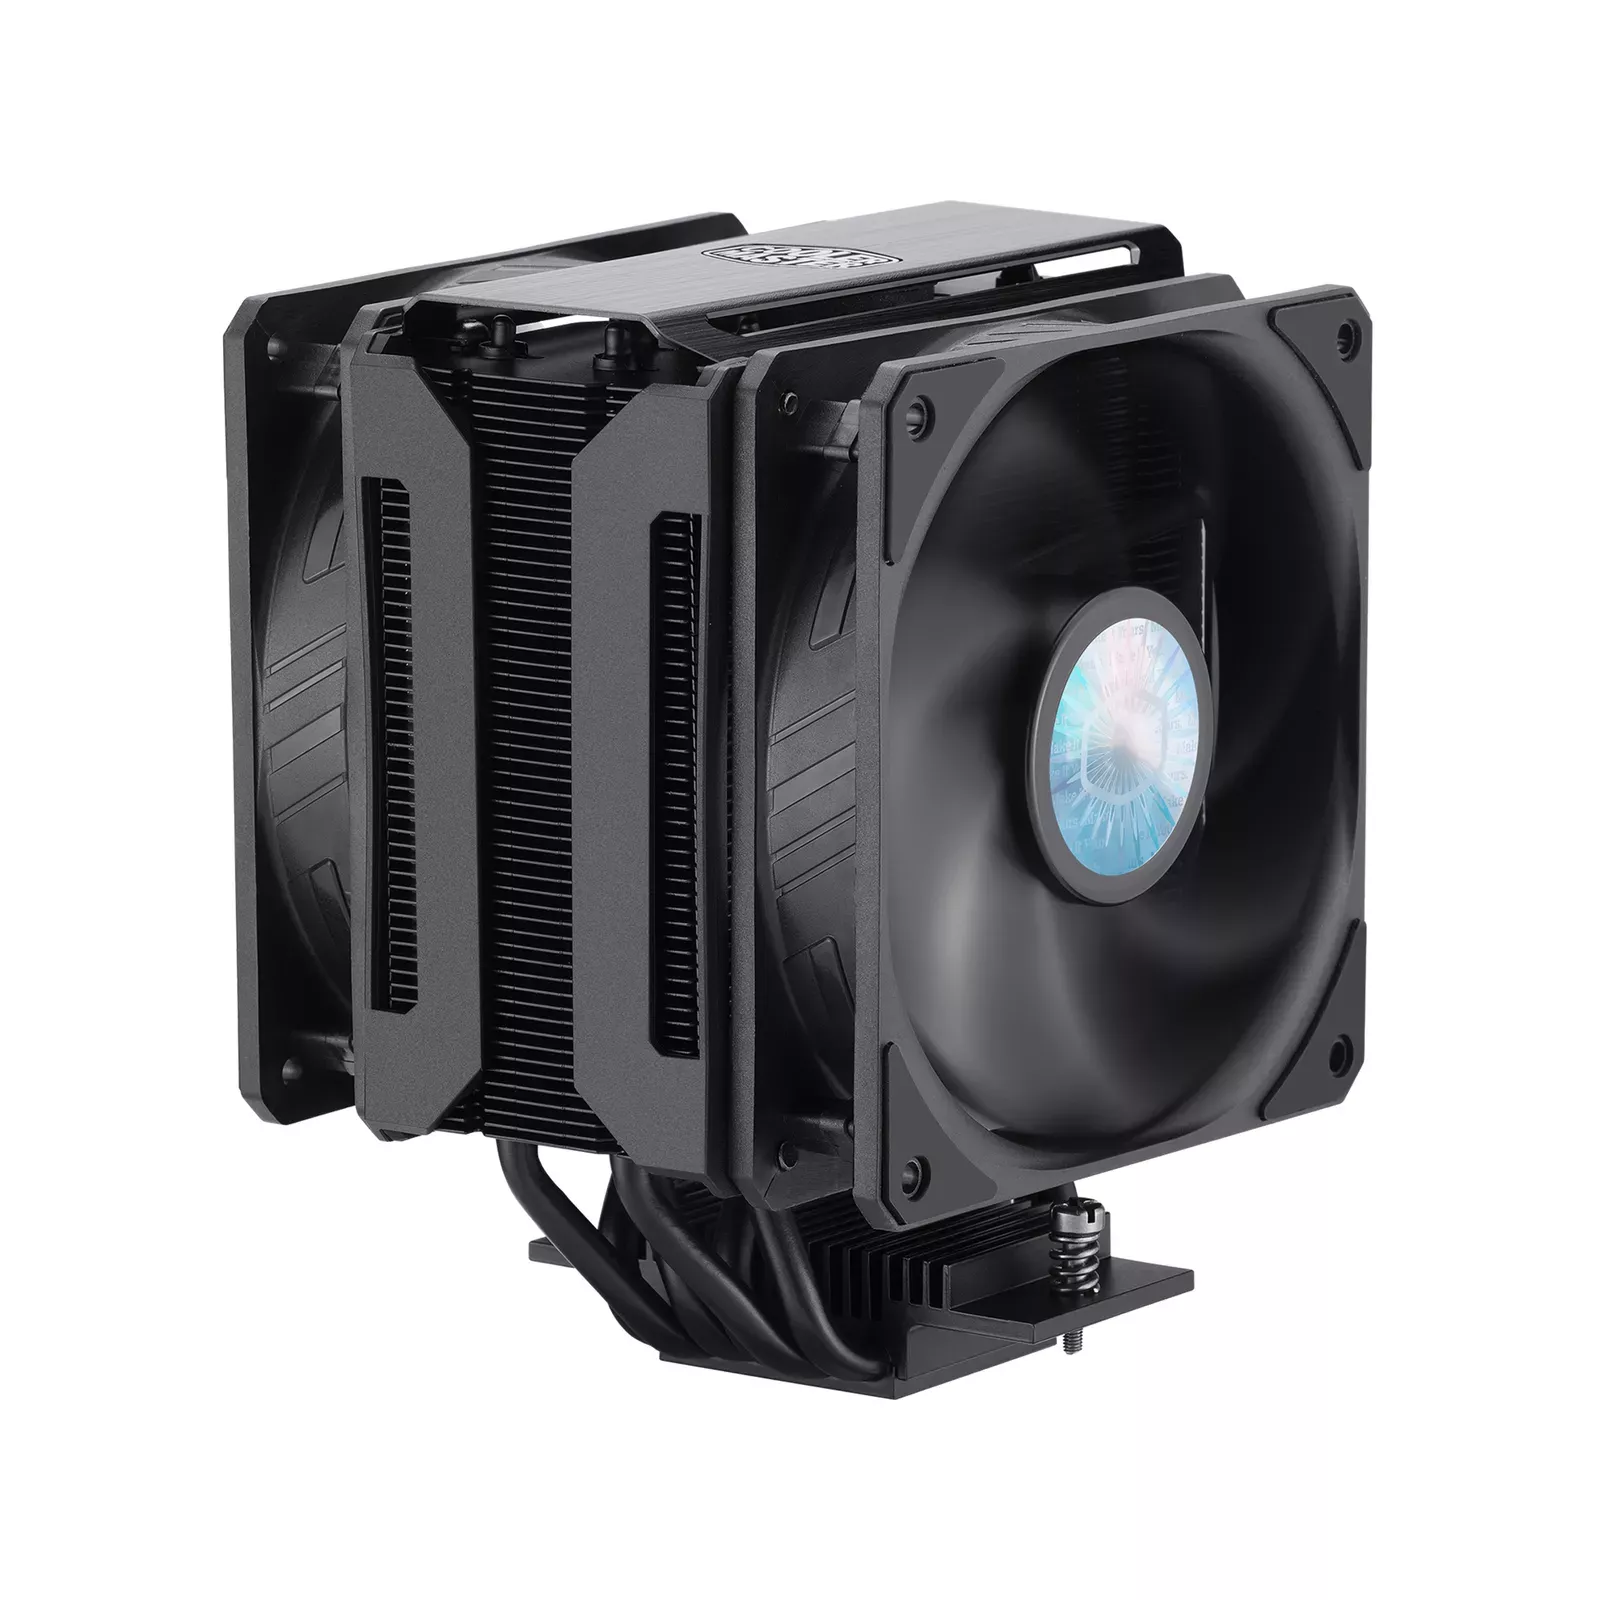 Cooler Master MAP-T6PS-218PK-R1 Photo 3